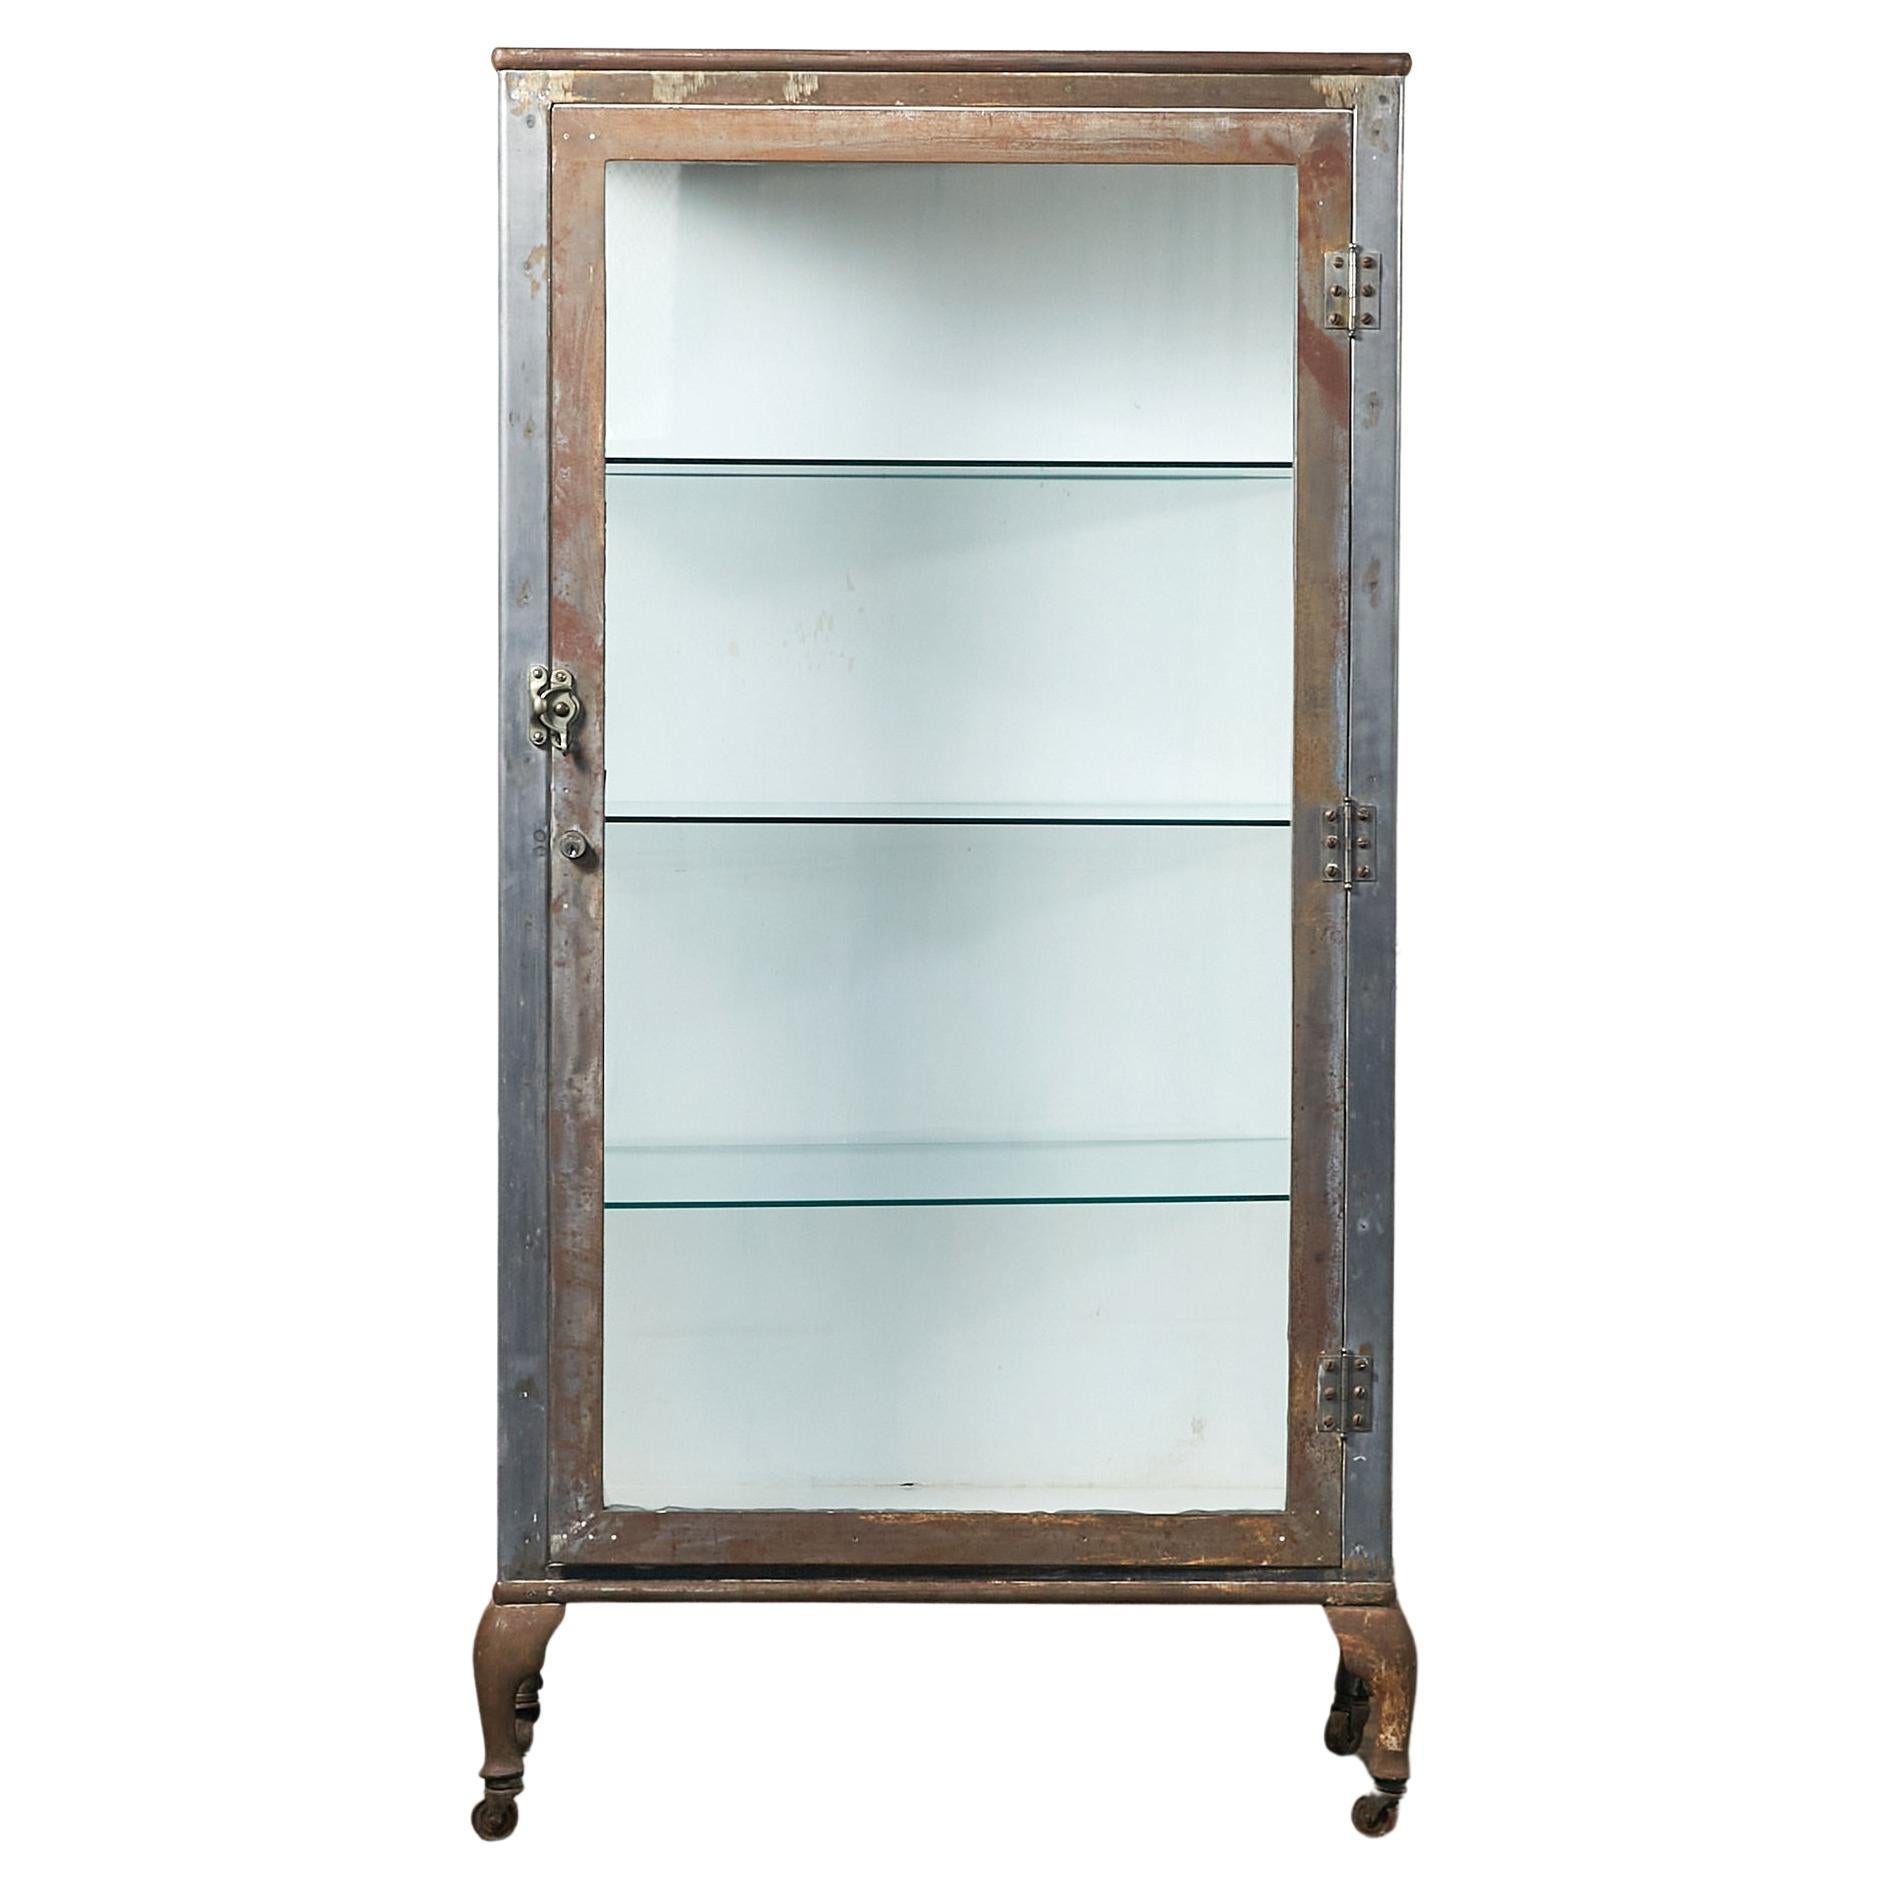 Tall Industrial Medicine Cabinet Metal Frame and Glass Shelves